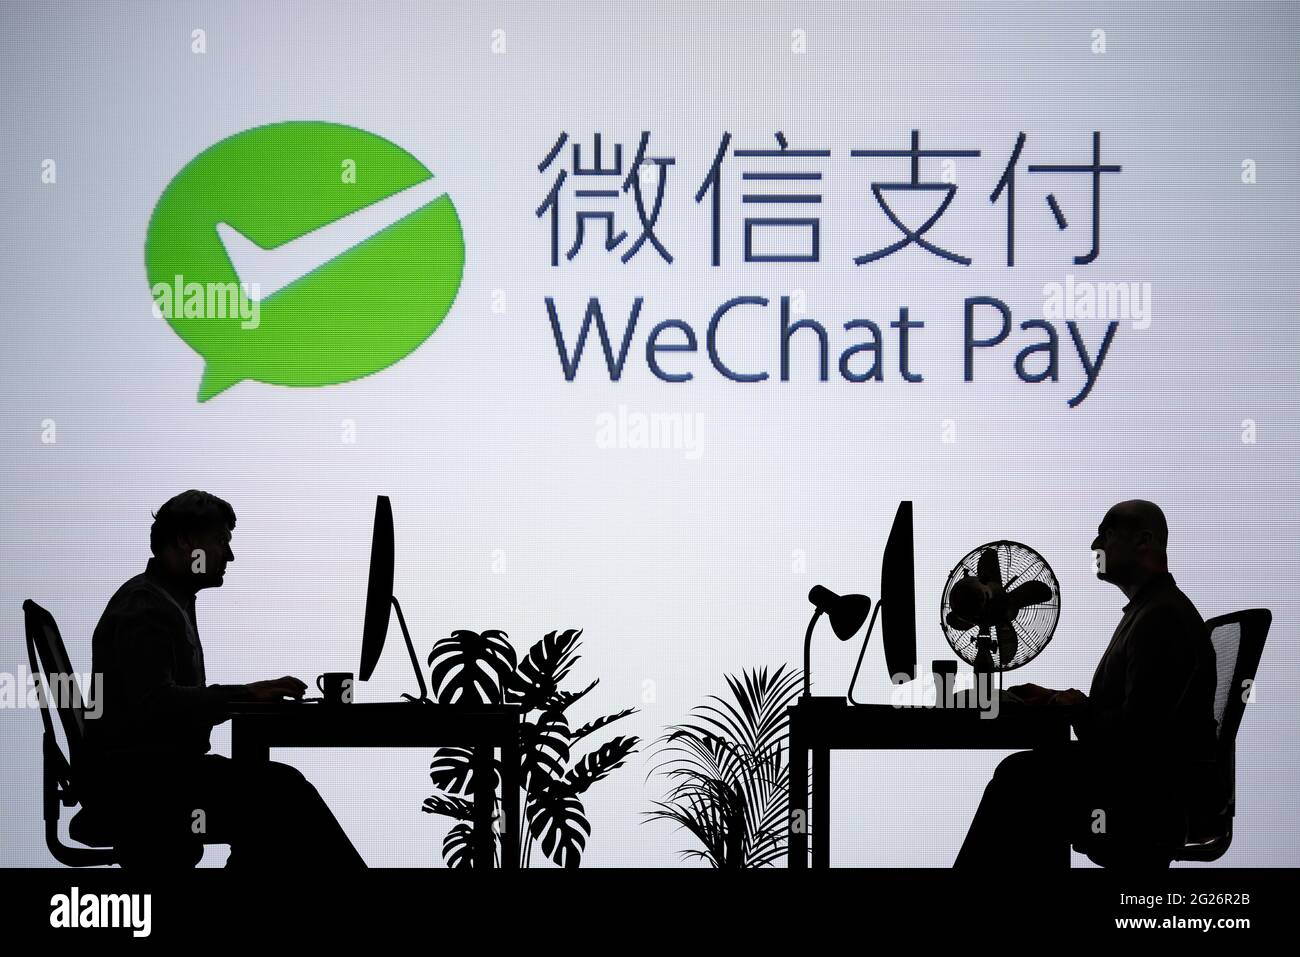 The WeChat Pay logo is seen on an LED screen in the background while two silhouetted people work in an office environment (Editorial use only) Stock Photo